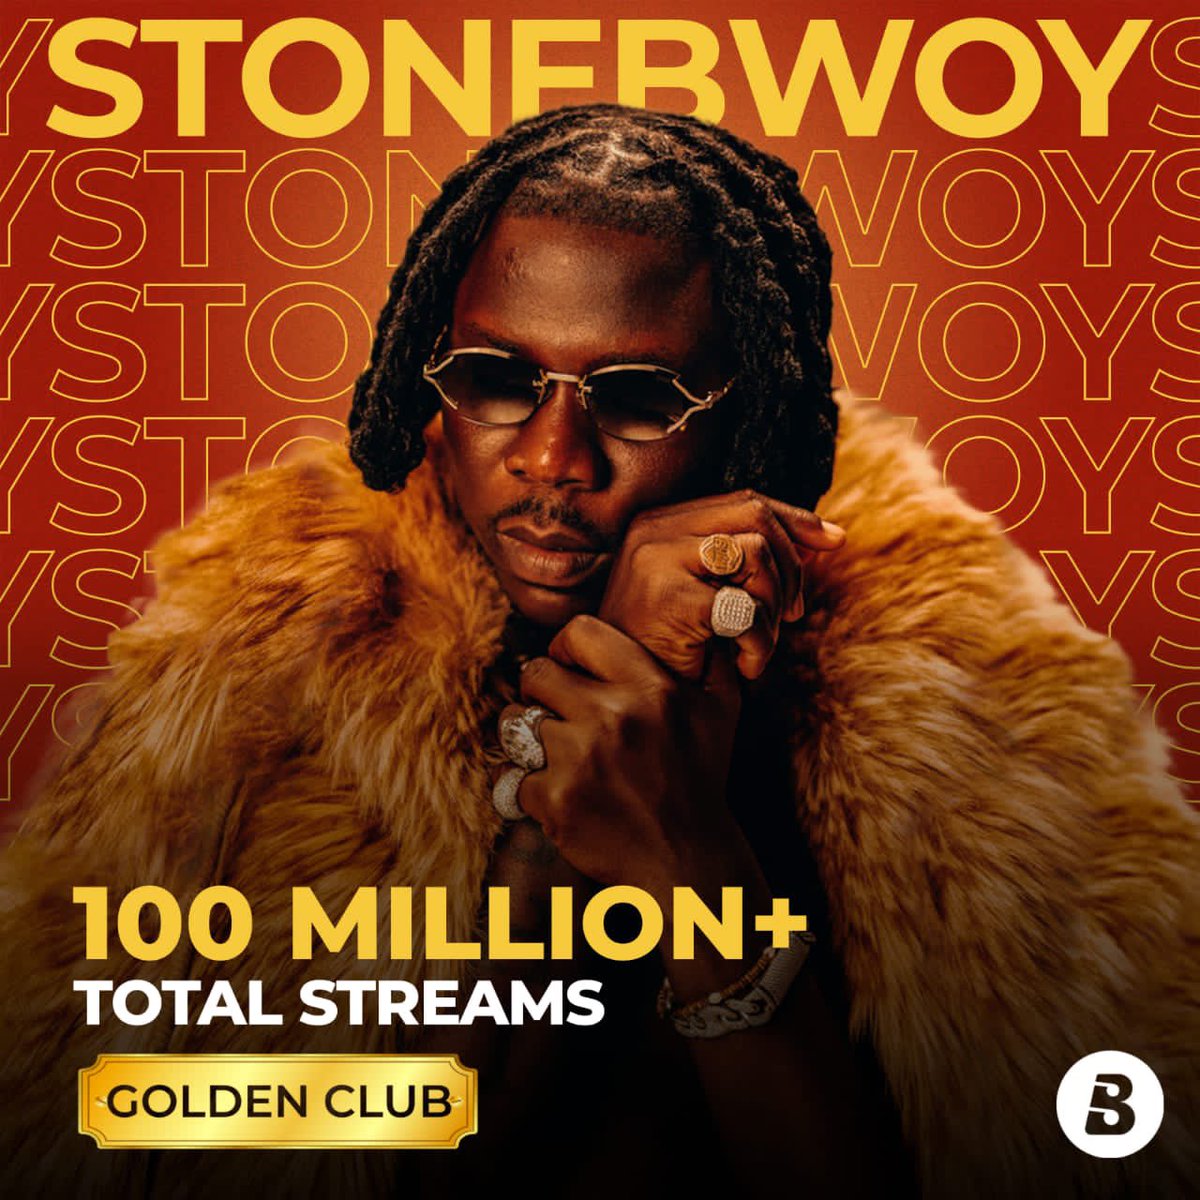 Blessings! #FIFTHDIMENSION
Quote Tweet
BoomplayGhana
@BoomplayGhana
·
4h
100 Million streams and counting🥳🥳🥳!!! Congratulations to @stonebwoy on hitting this monumental milestone and joining the Boomplay Golden Club🔥. 

#BoomplayGoldenClub #Stonebwoy100MBoomplayStreams